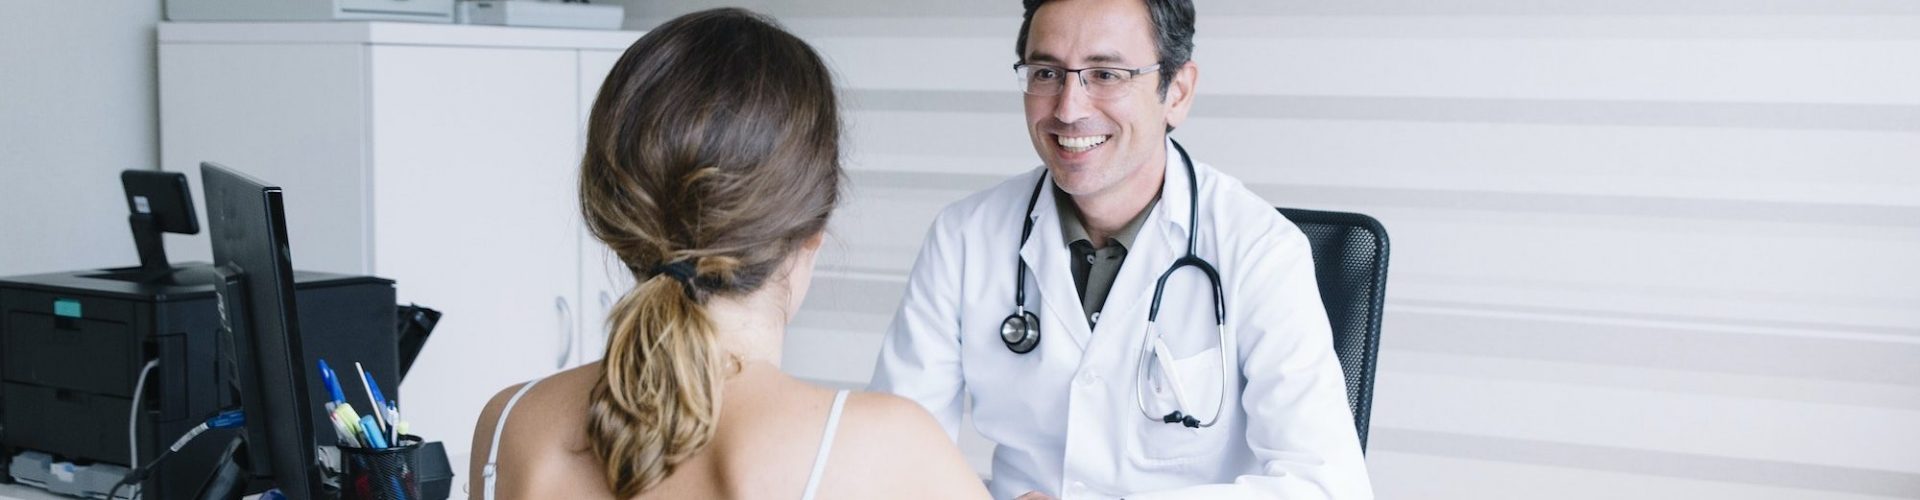 Male doctor with female patient